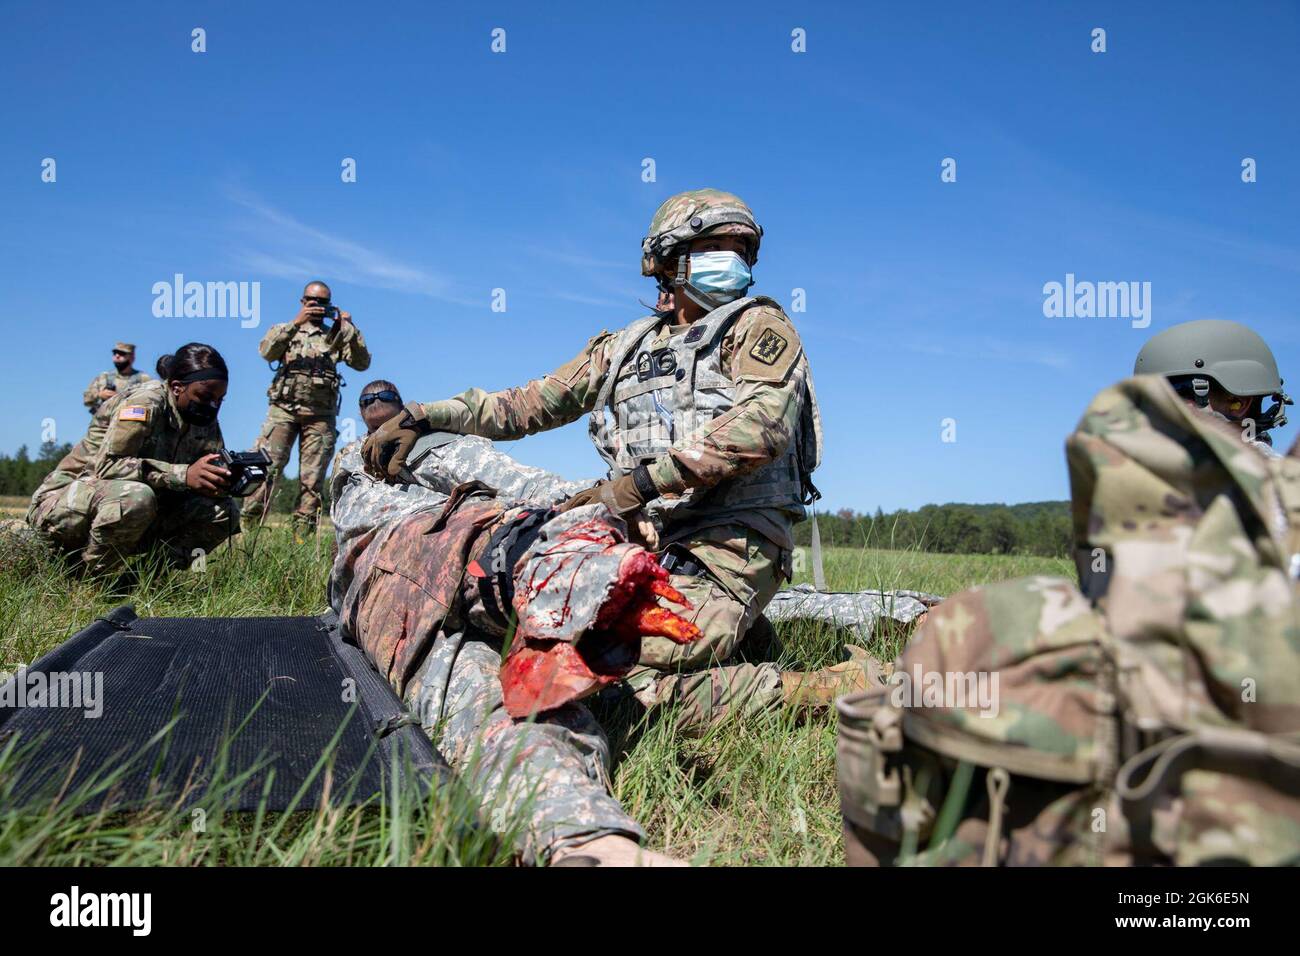 U.S. Army Reserve Pfc. Emonie Jones, a medic from the 396th Medical Company (Ground Ambulance) , loads a training dummy onto a litter during a mass casualty training at Fort McCoy, Wisconsin, Aug. 14, 2021. The event, a response to a downed C-130 Hercules Transport Aircraft, is a part of Global Medic 2021, an initiative to put medics in realistic scenarios that force them to rely on all of their skills in chaotic situations. Stock Photo